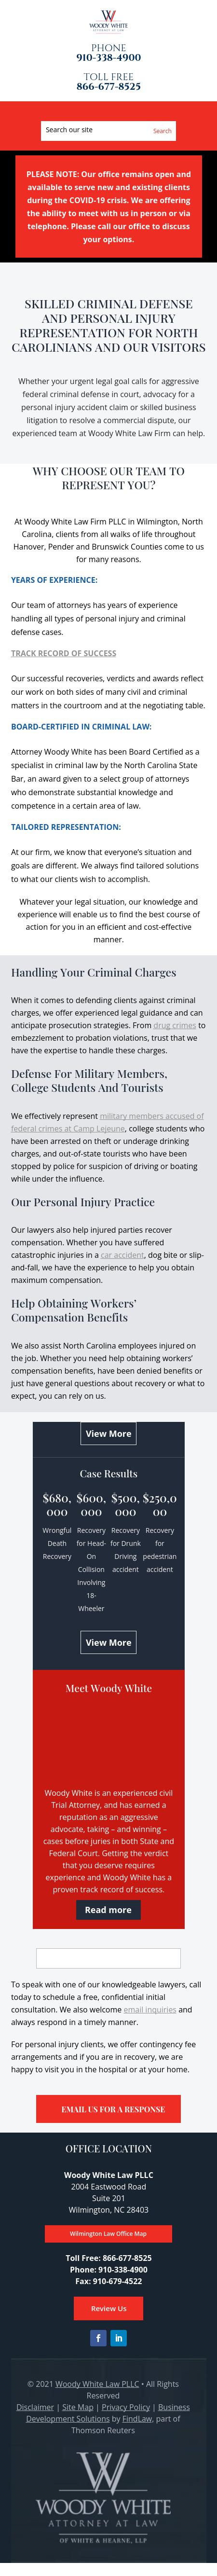 Woody White Law PLLC - Wilmington NC Lawyers